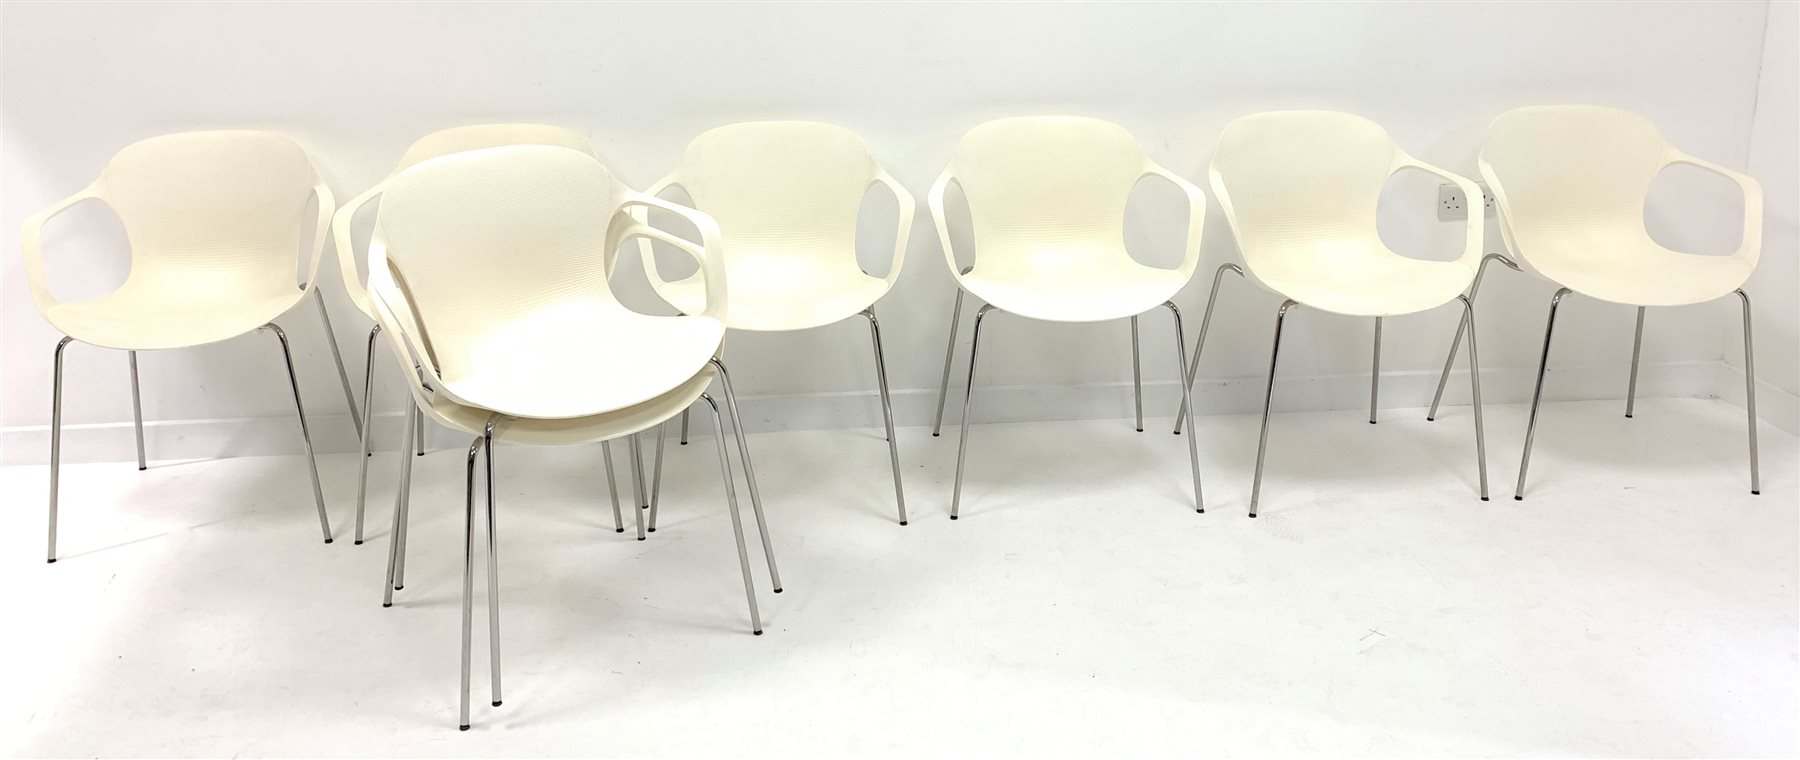 Arne Jacobson et al. for Fritz Hansen - Contemporary 'Super Elliptical' dining table with white lam - Image 3 of 6